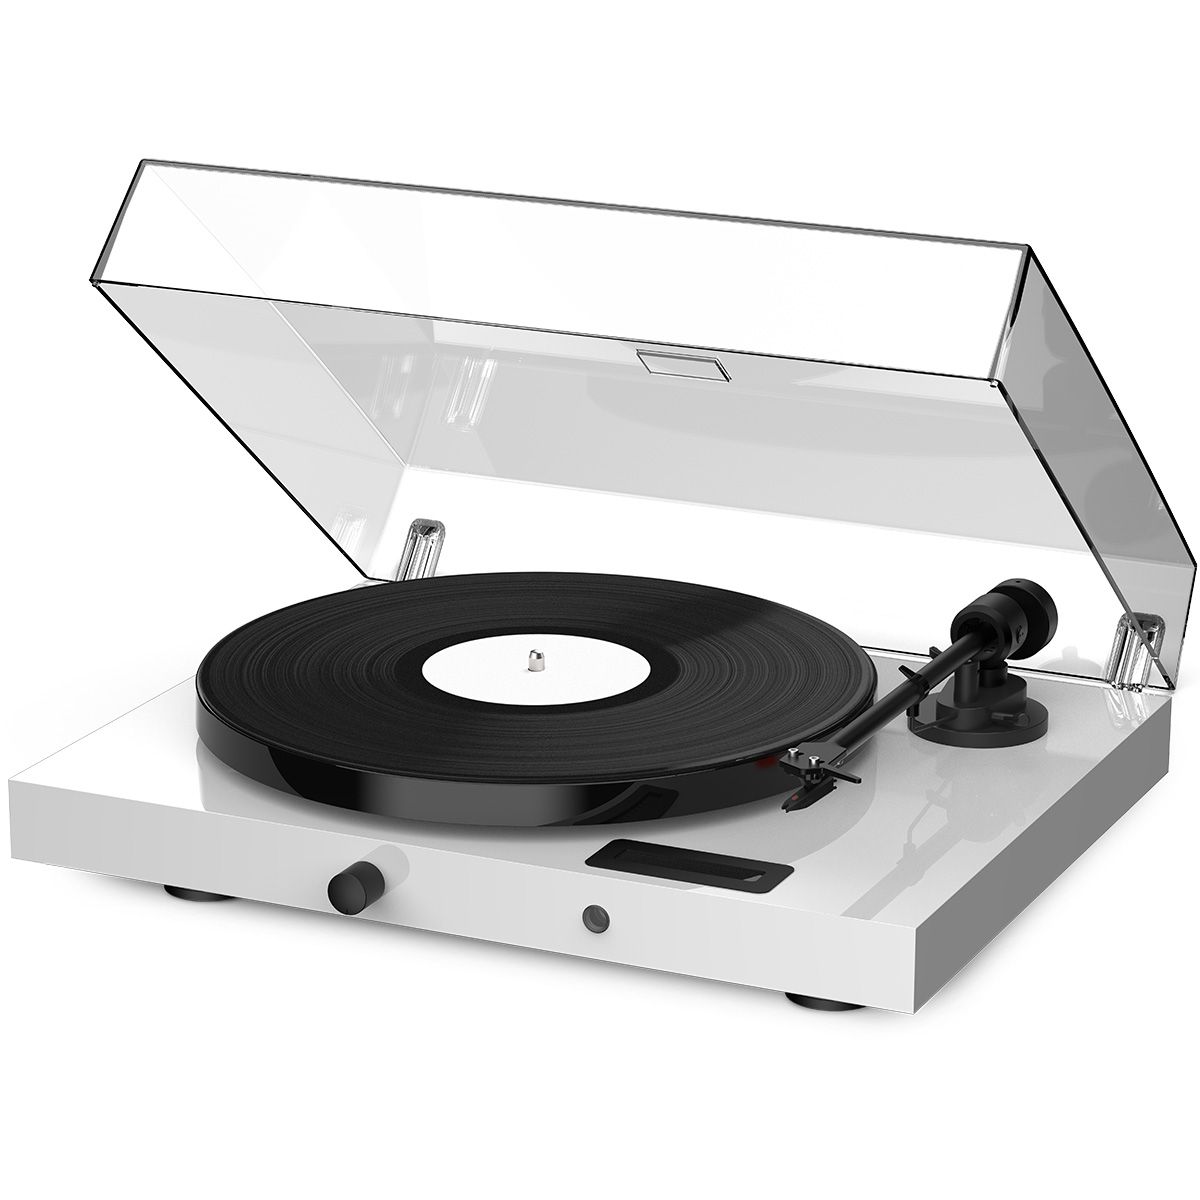 Pro-Ject Juke Box E1 Turntable in white w/ dustcover open